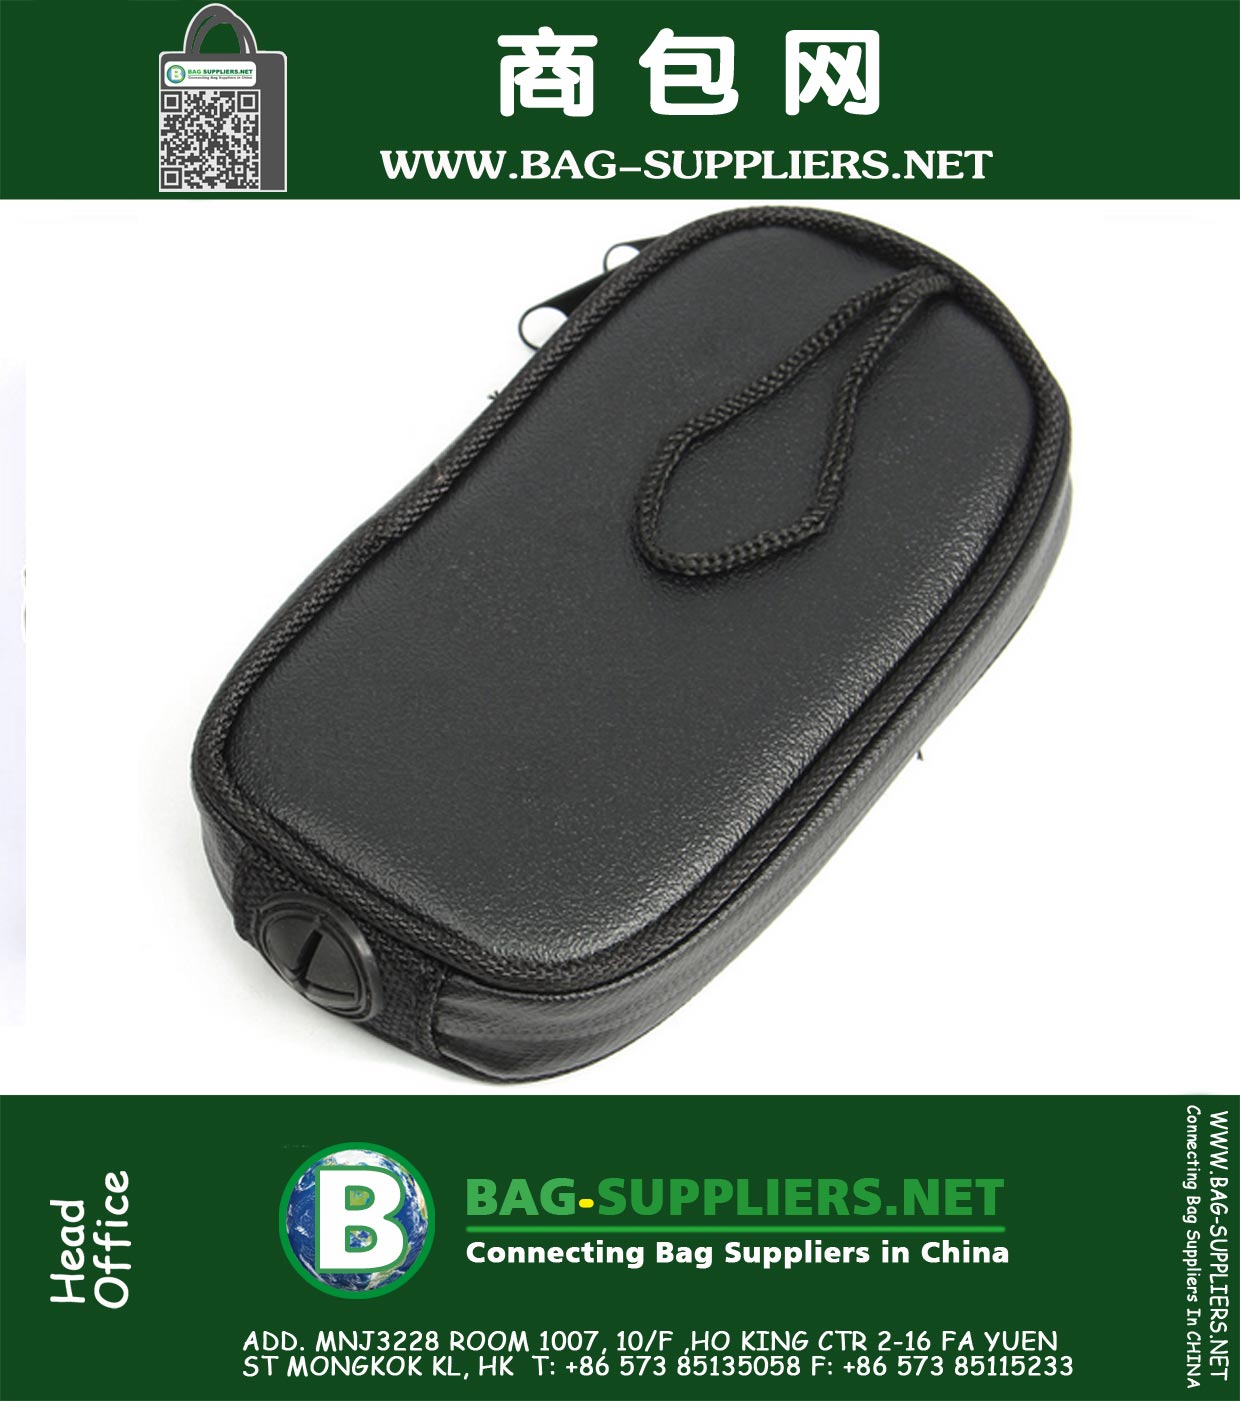 Screen Touch Navigation Bags